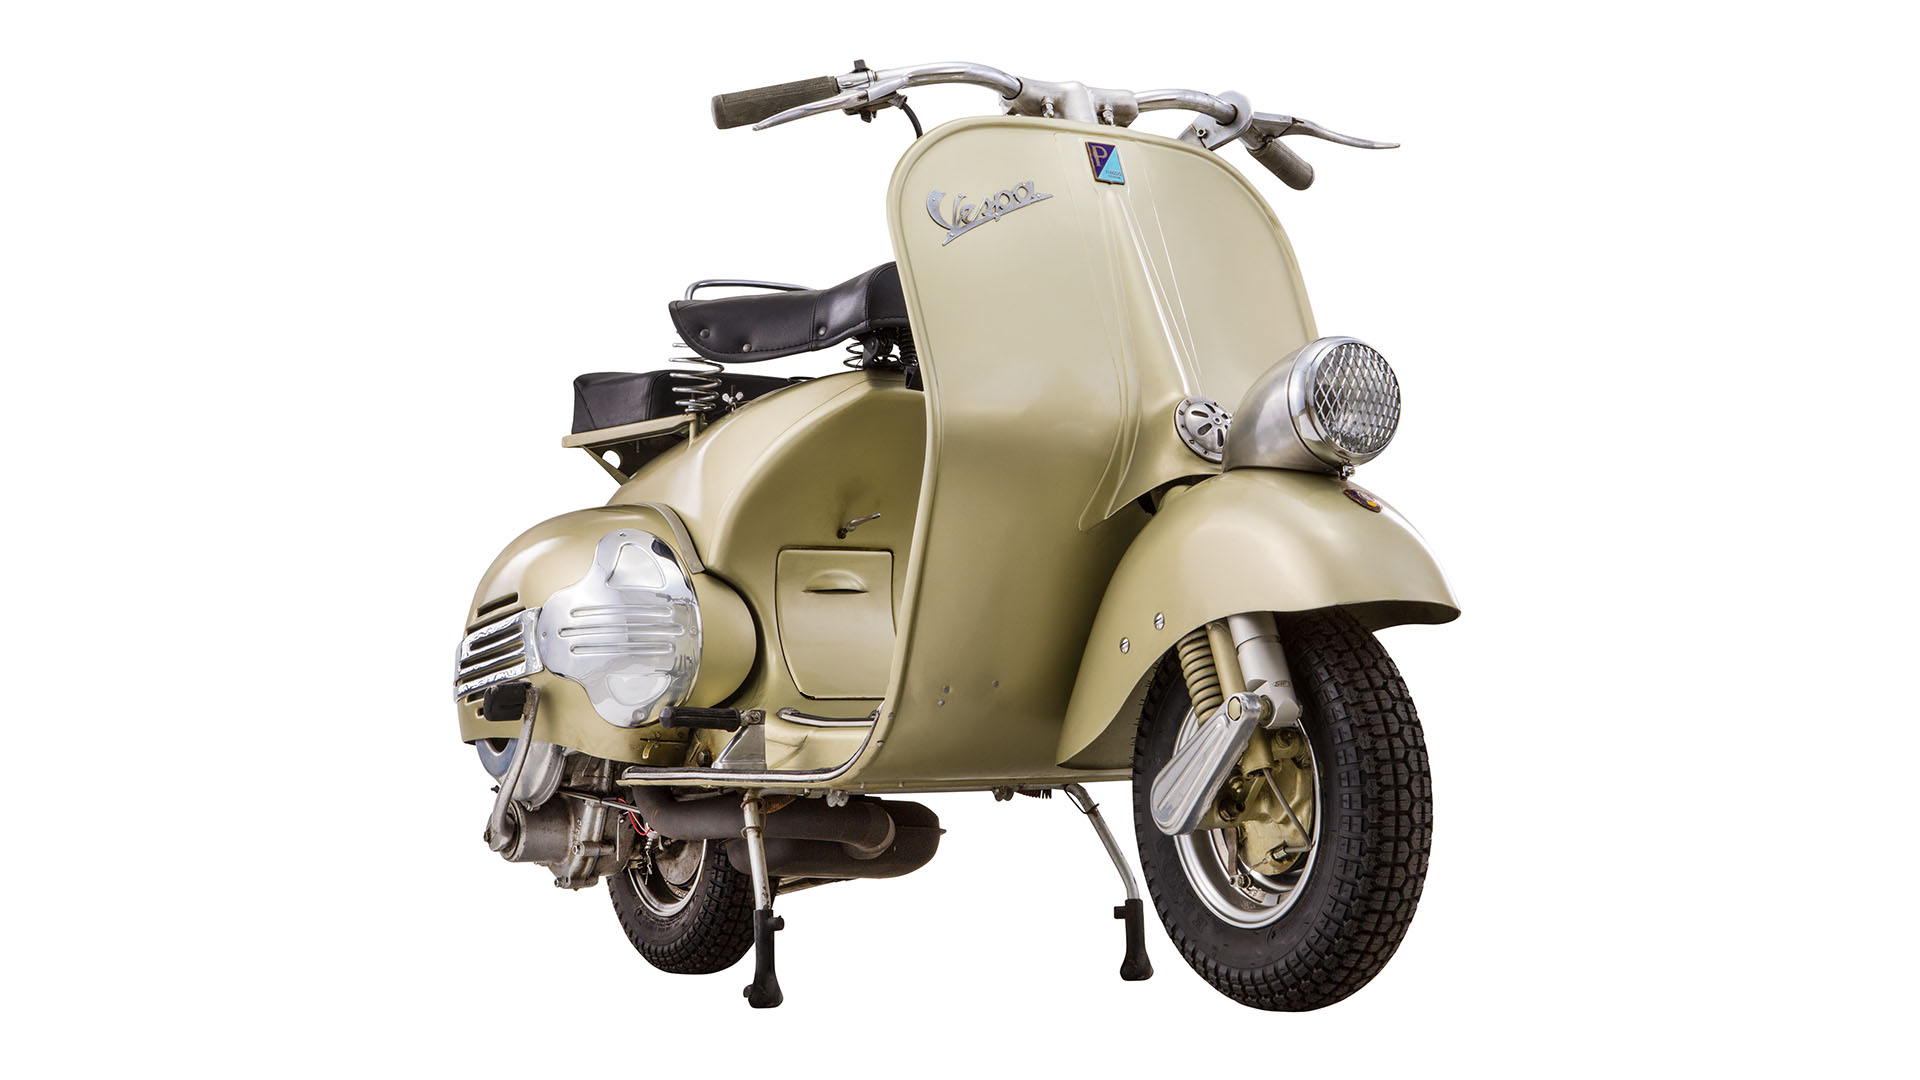 Well cushioned: The Vespa shock absorbers